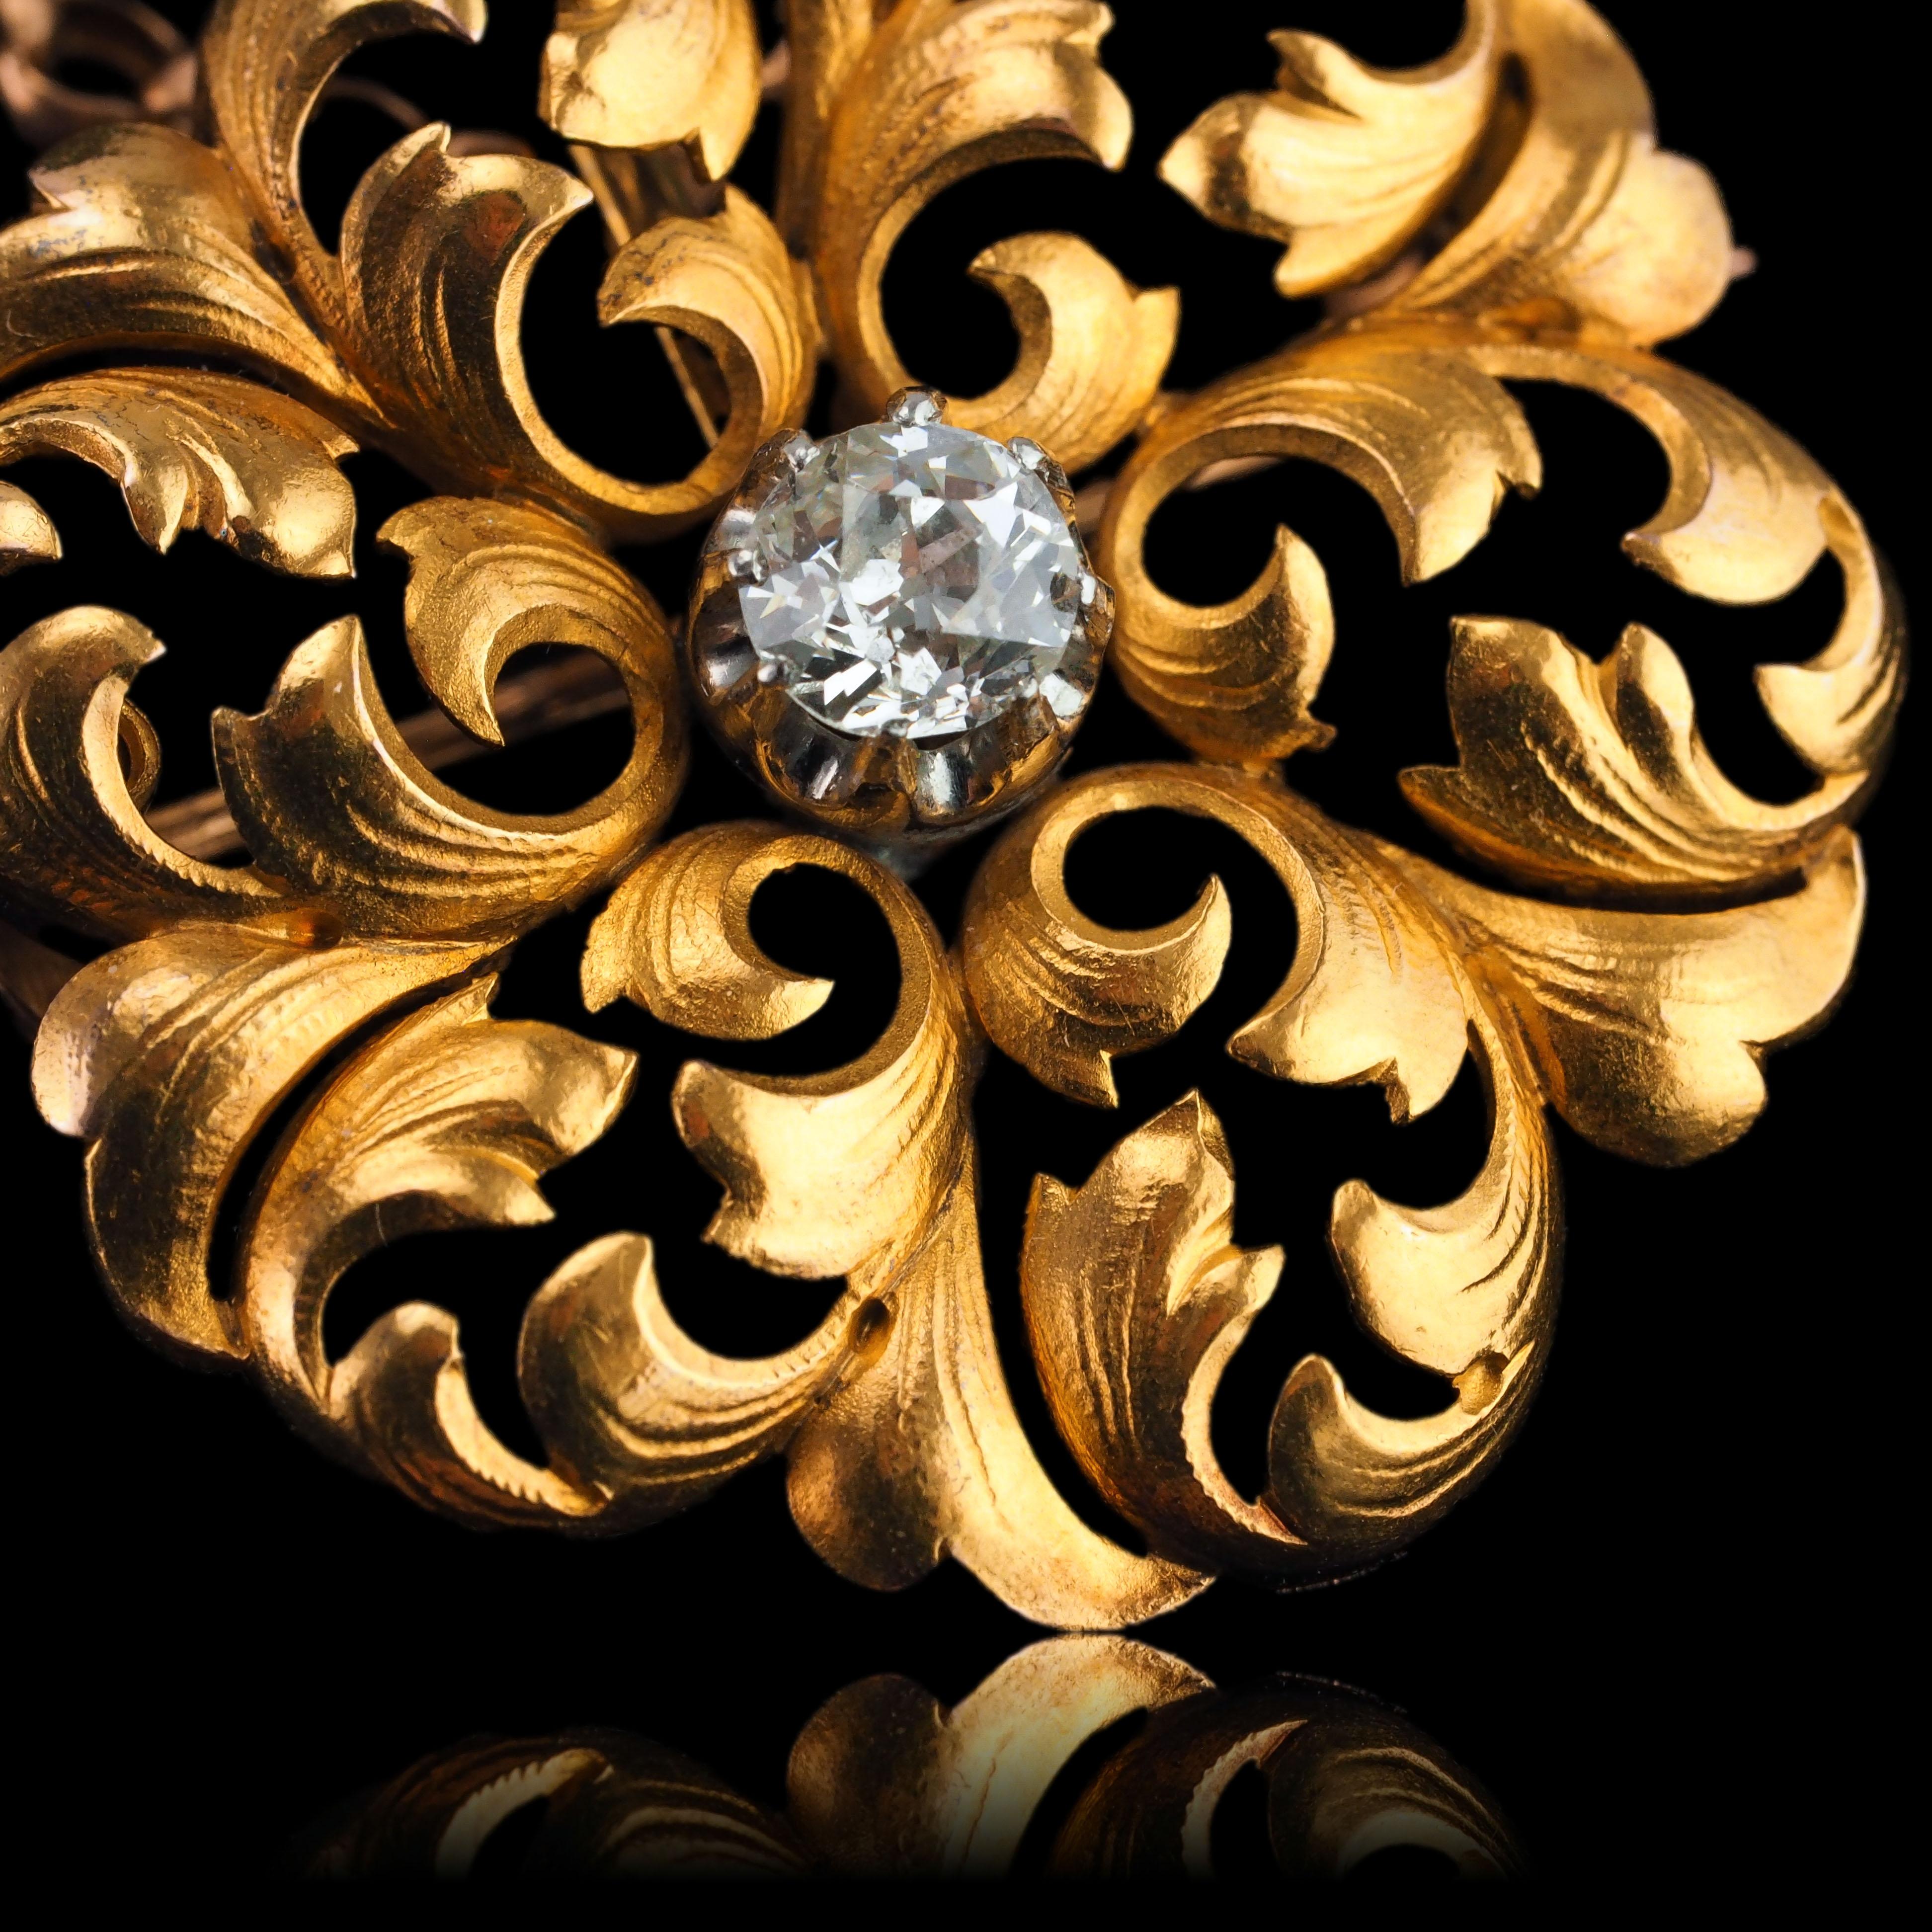 Antique French Diamond Necklace 18K Gold Pendant Brooch 19th C. Flower Acanthus For Sale 13